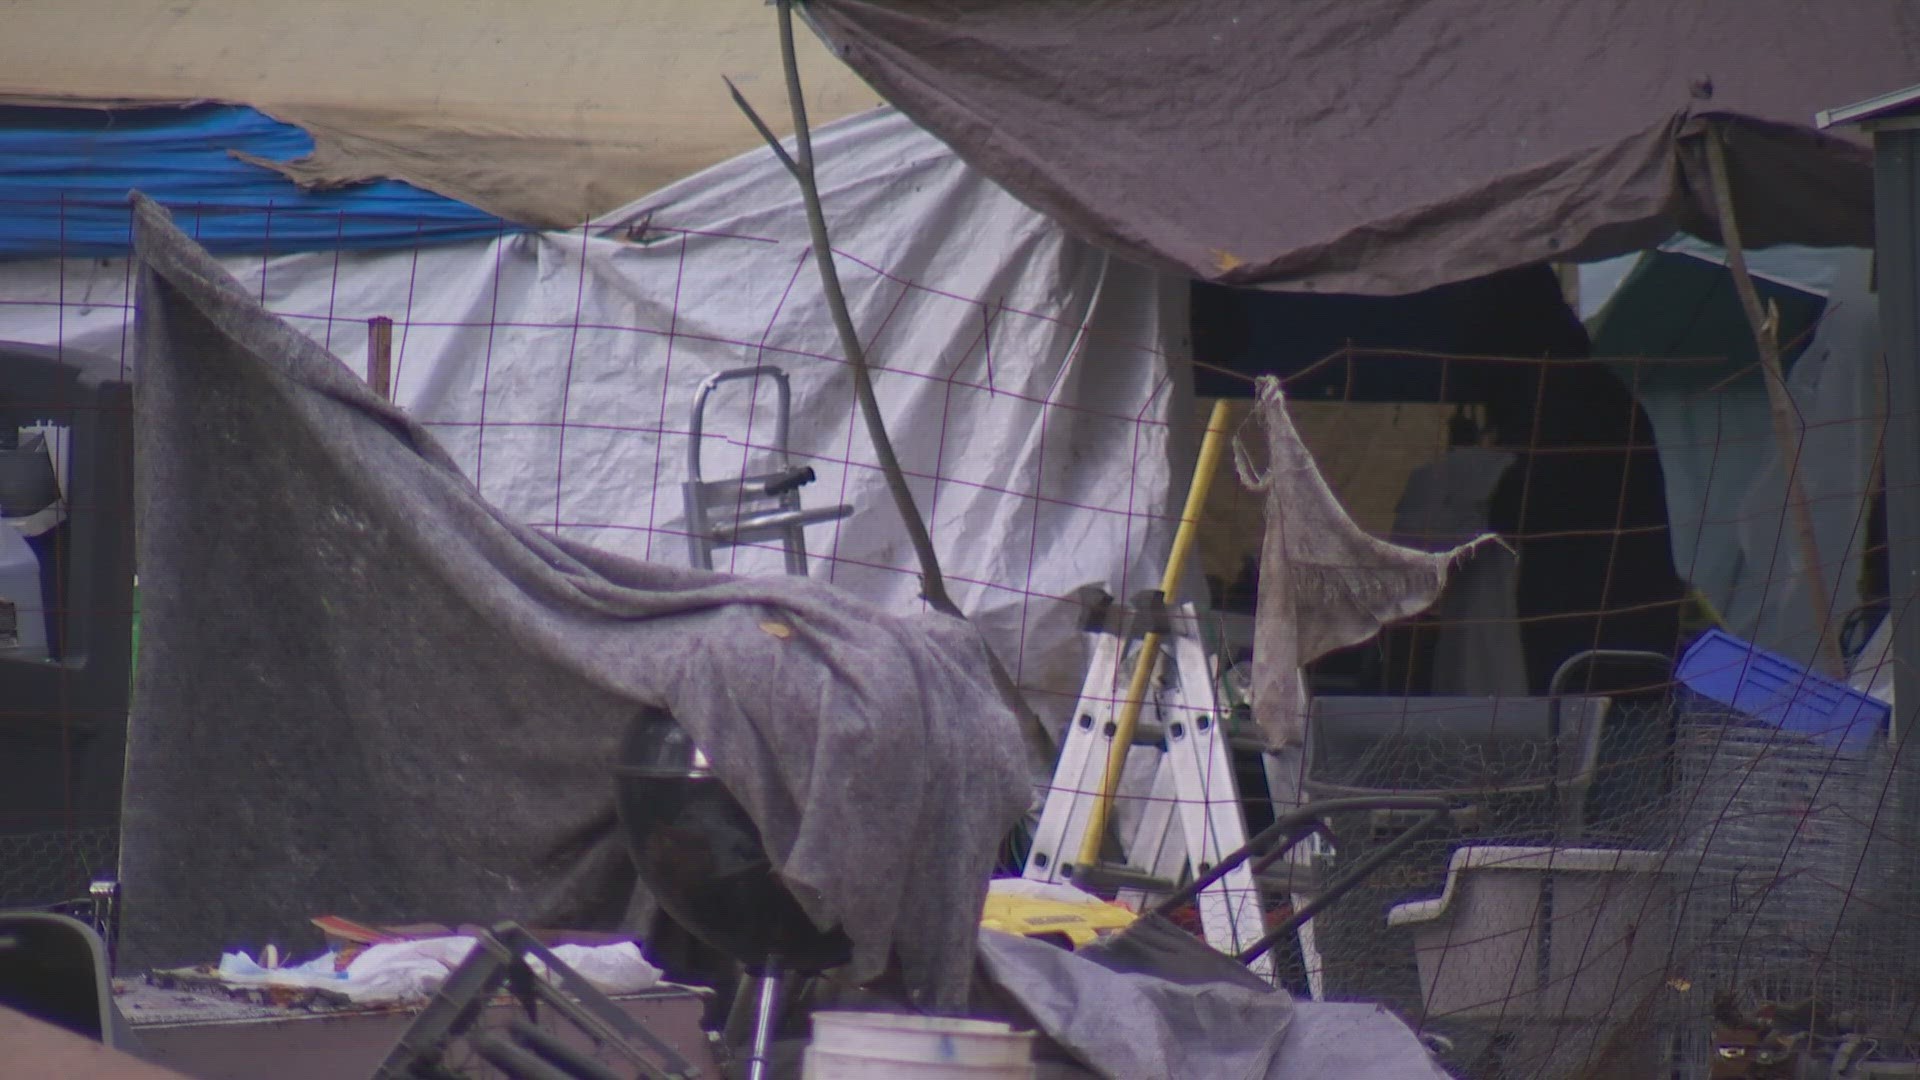 Green River RV encampment cleared because of hazards, officials say ...